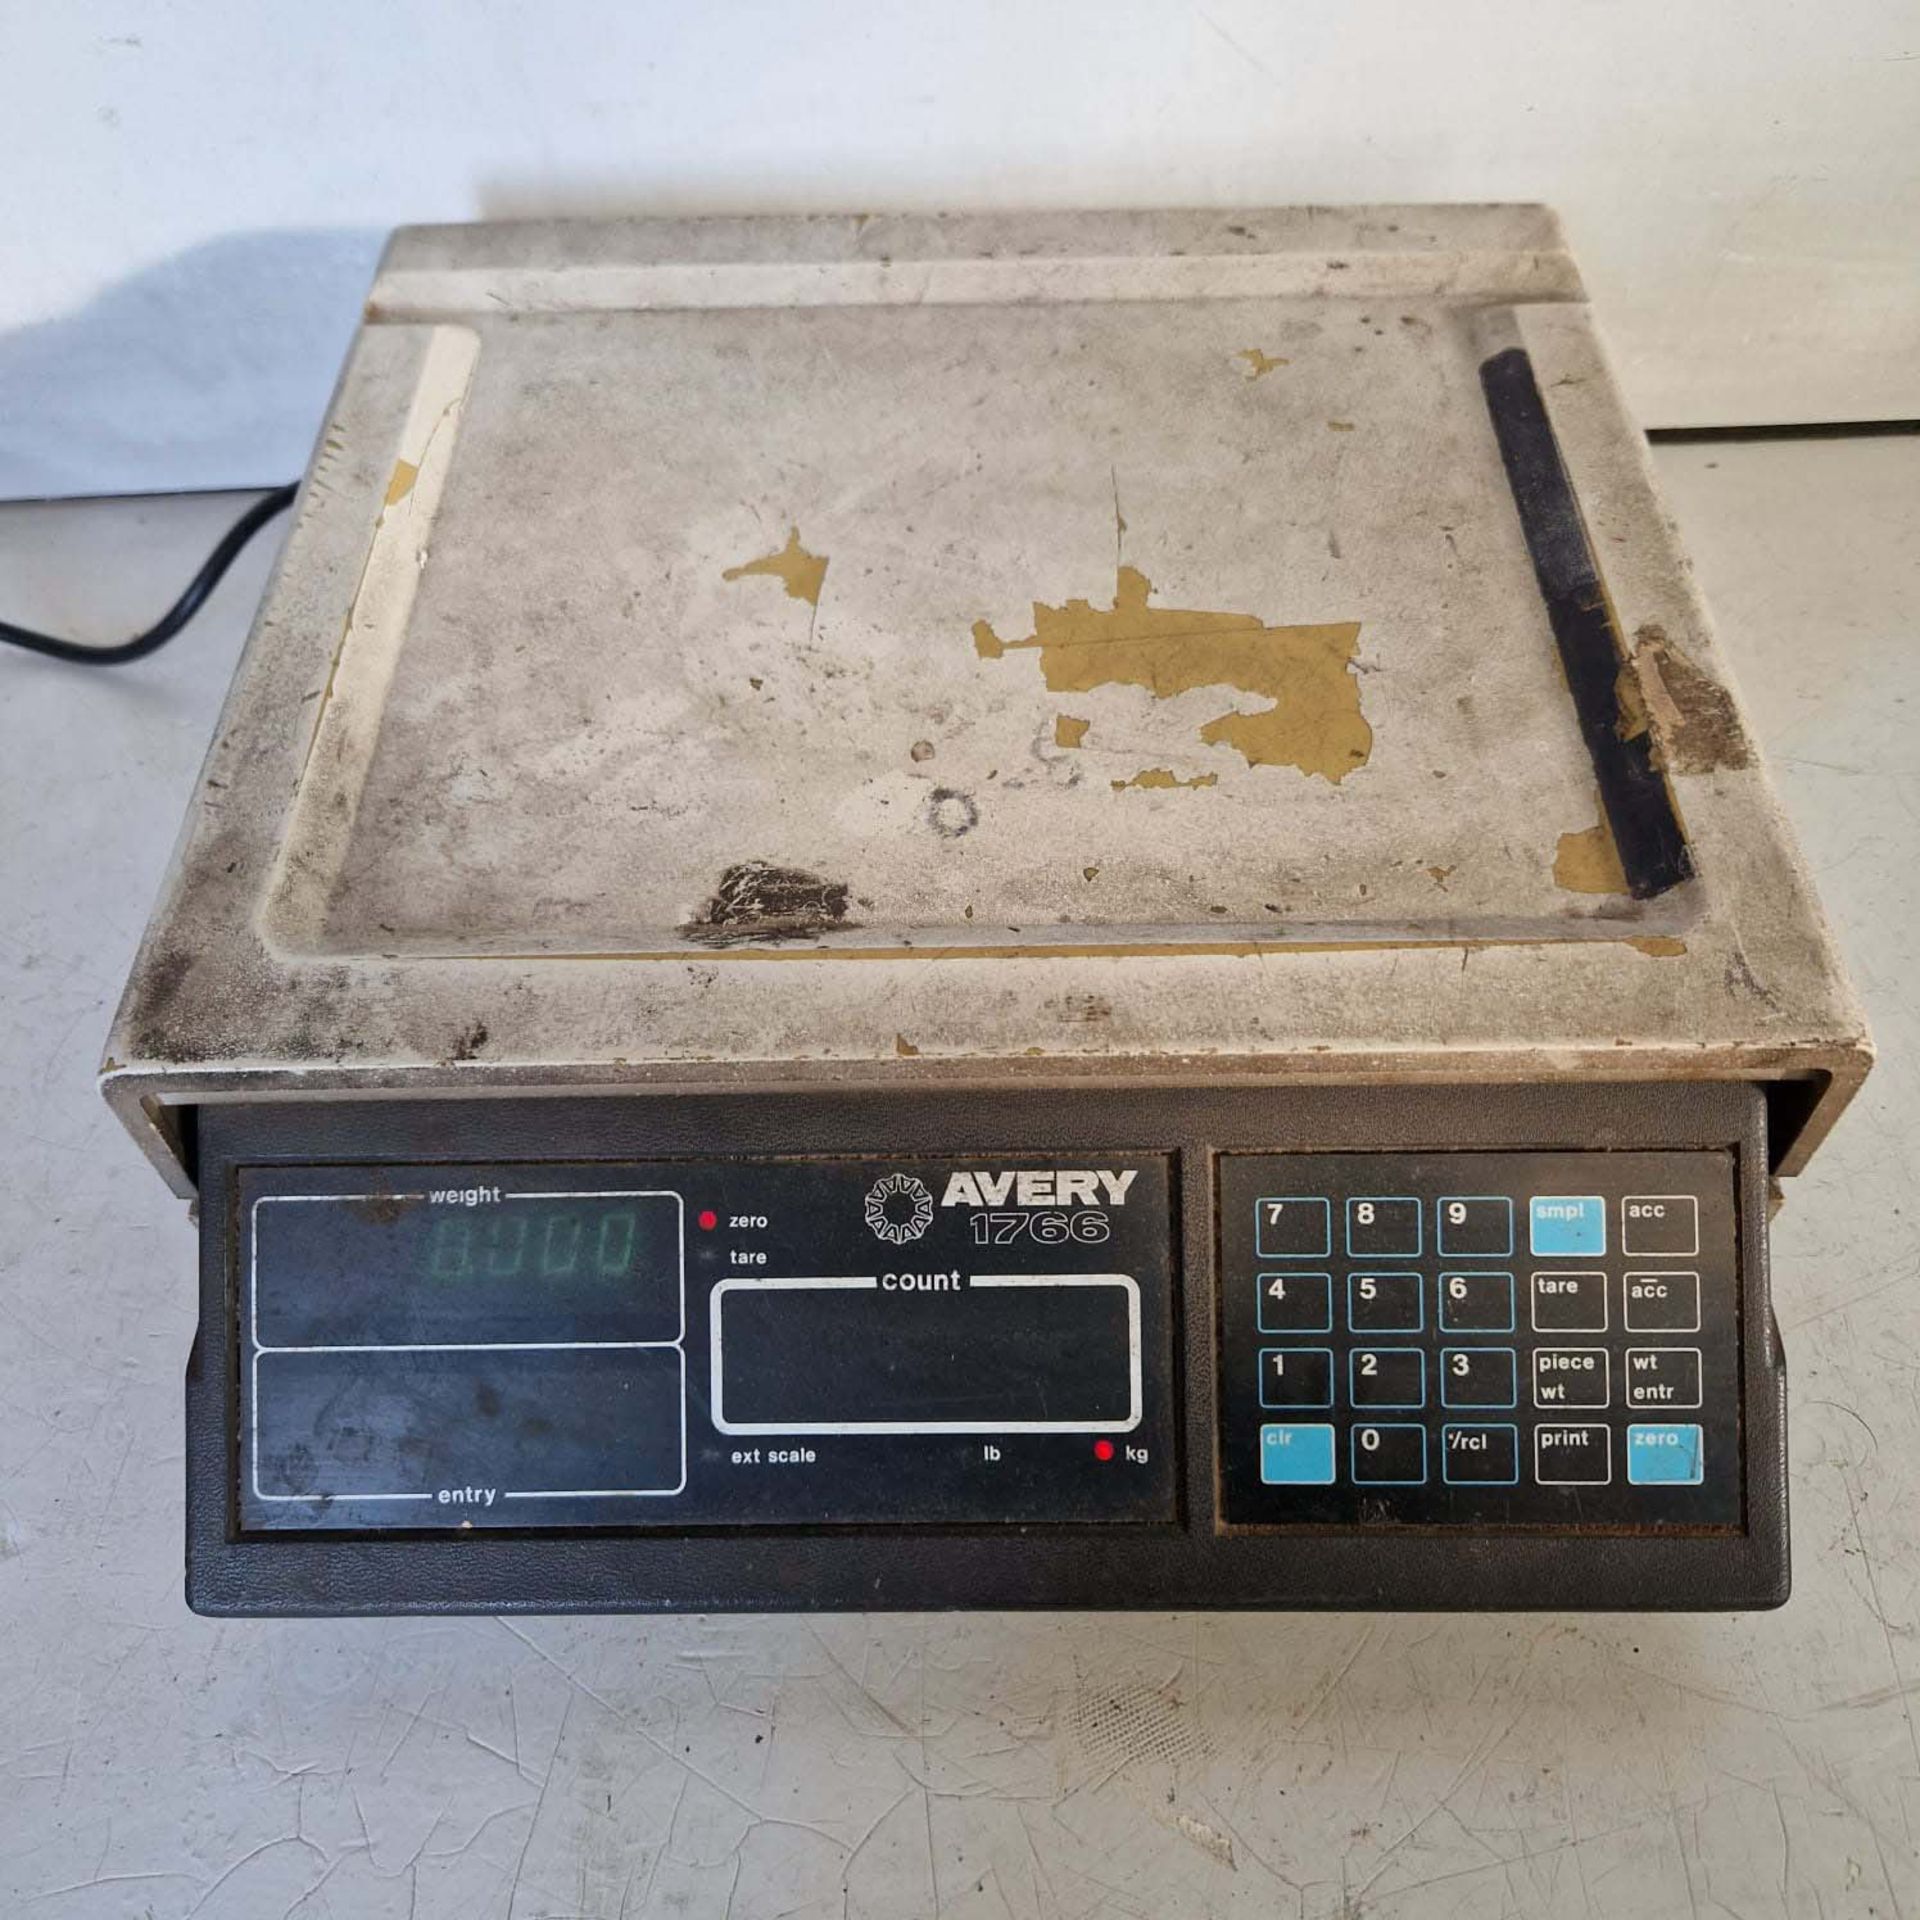 Avery Model 1766 Parts Weighing Scale. Platform size 300 x 250mm.